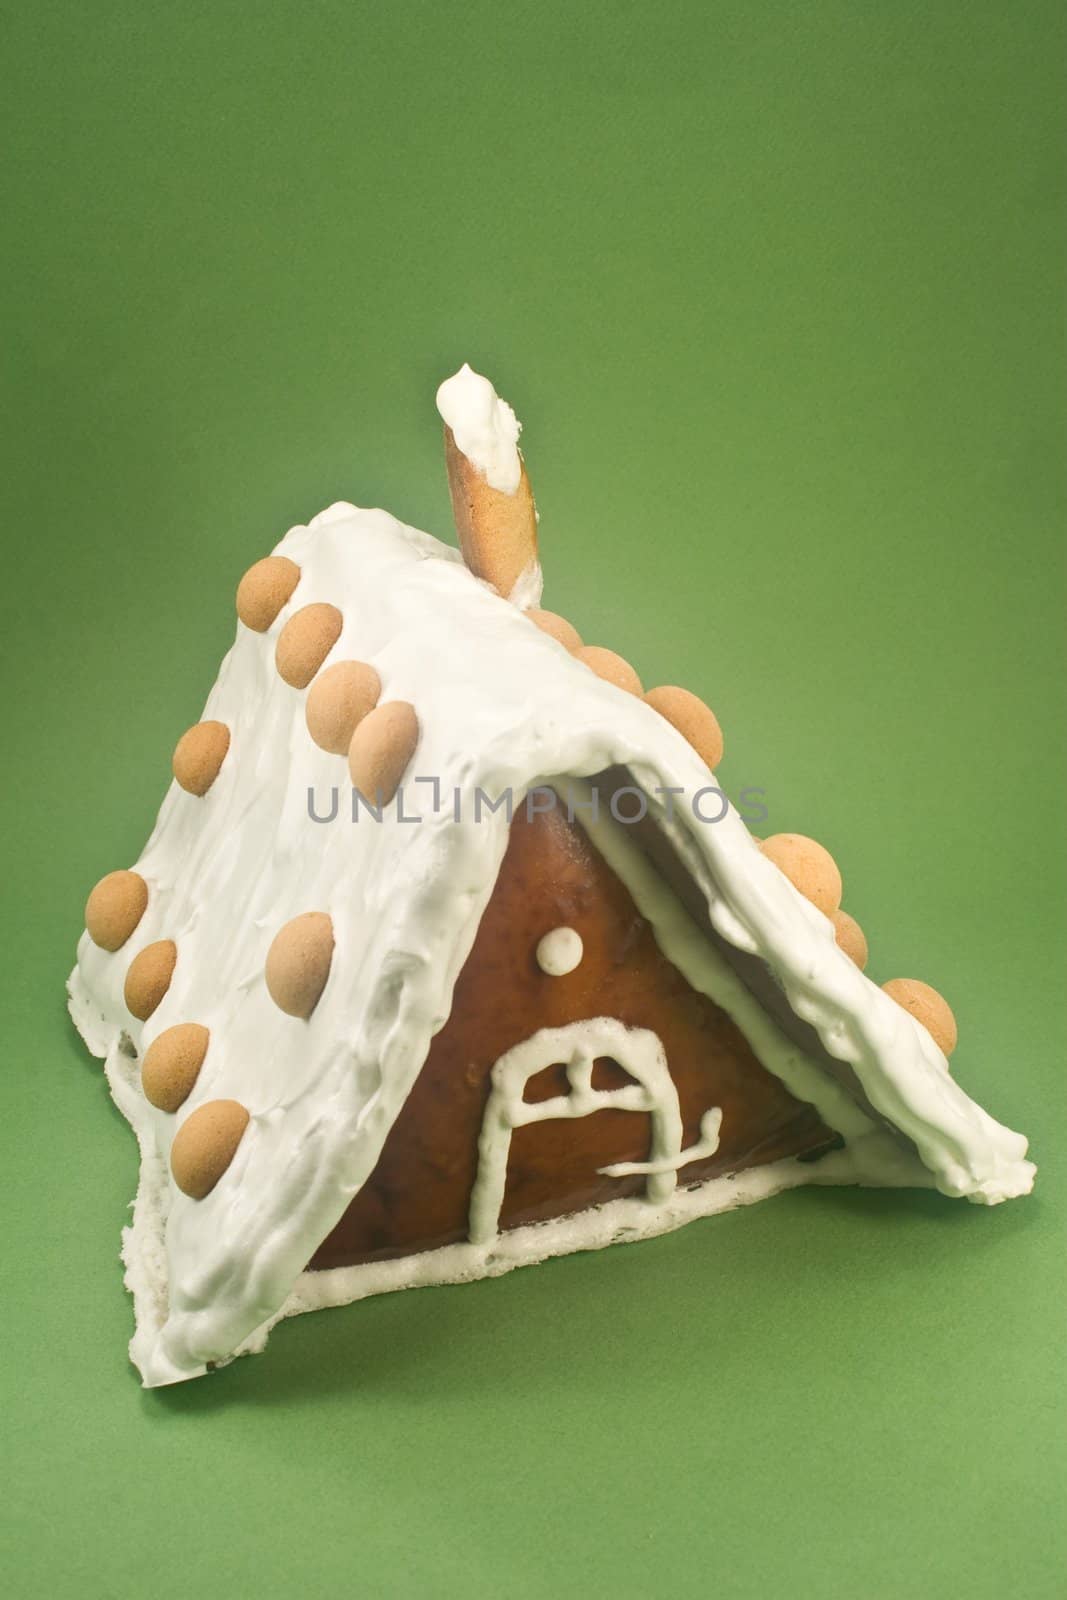 Gingerbread house on green background